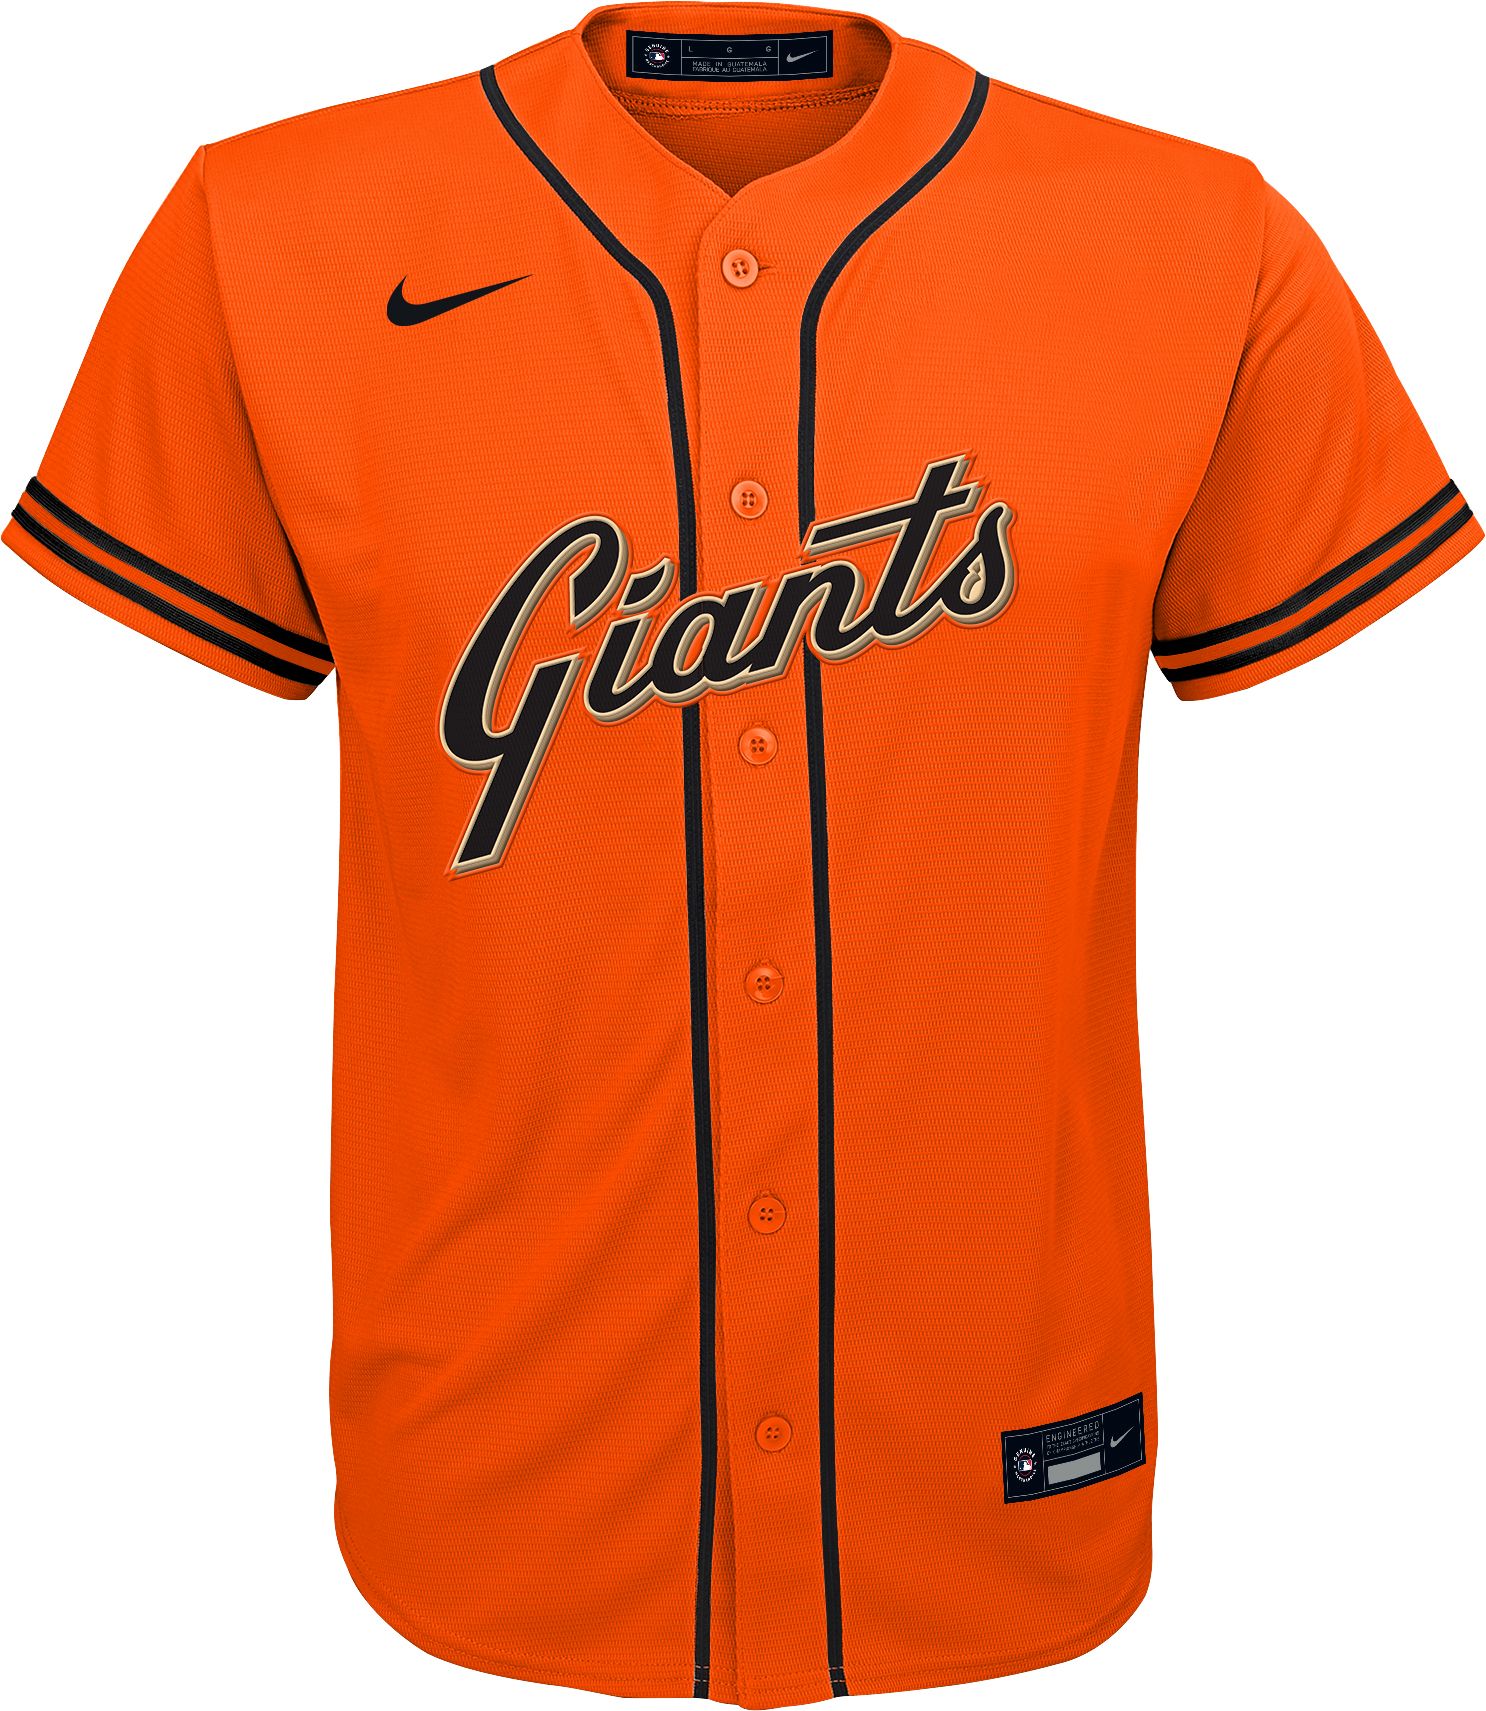 buster posey youth replica jersey